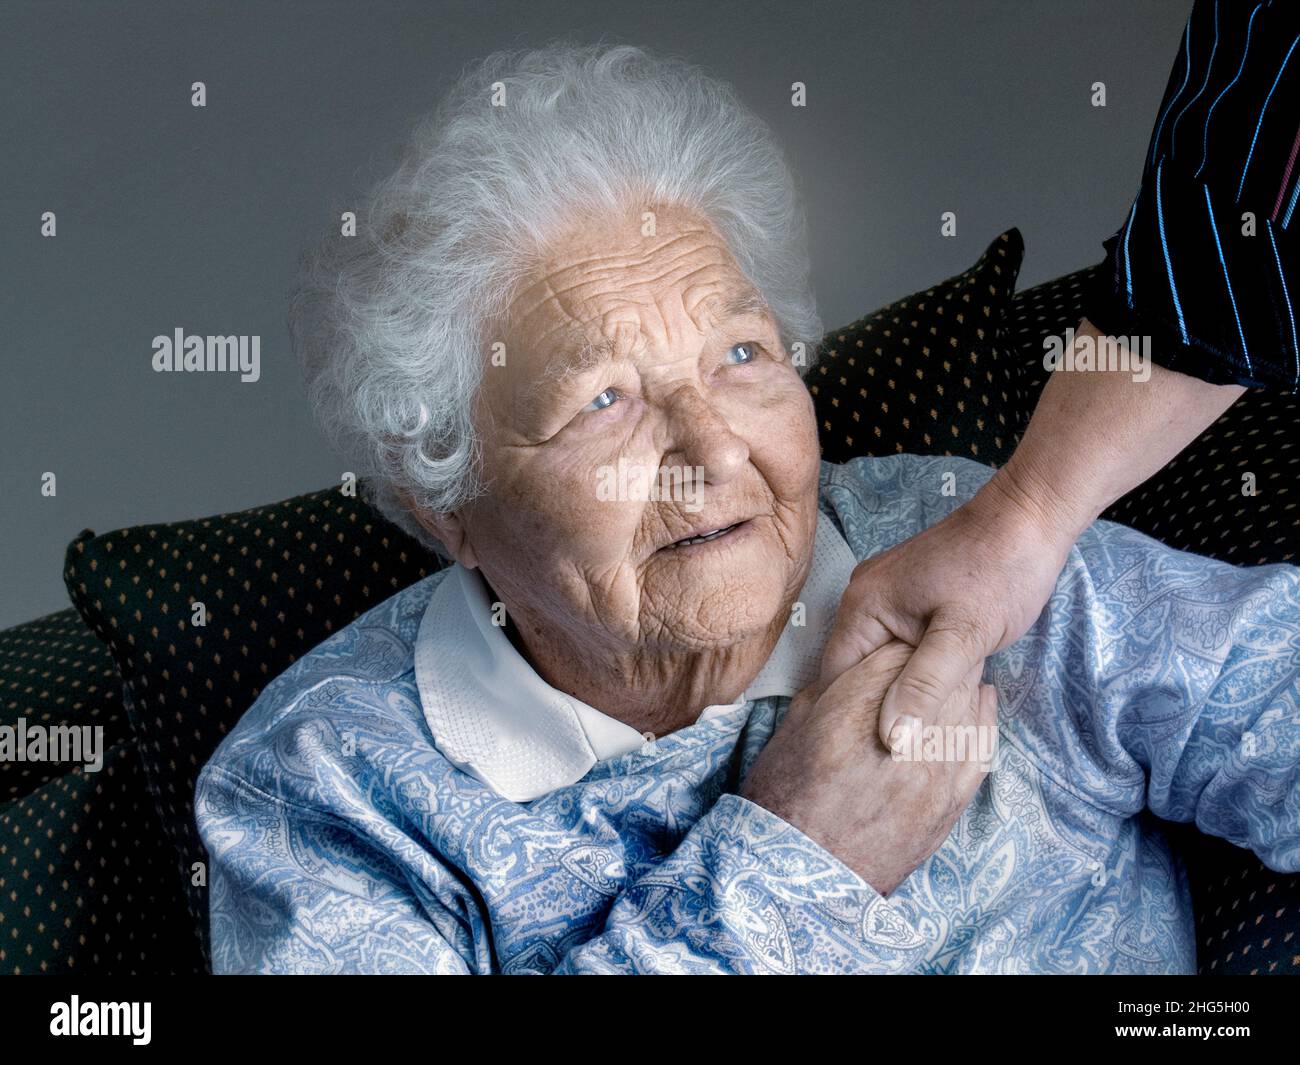 Elderly contented independent elderly senior lady holds comforting hand of carer nurse in her room. Confidently facing her future with caring carer care Horizontal Interior natural light Stock Photo